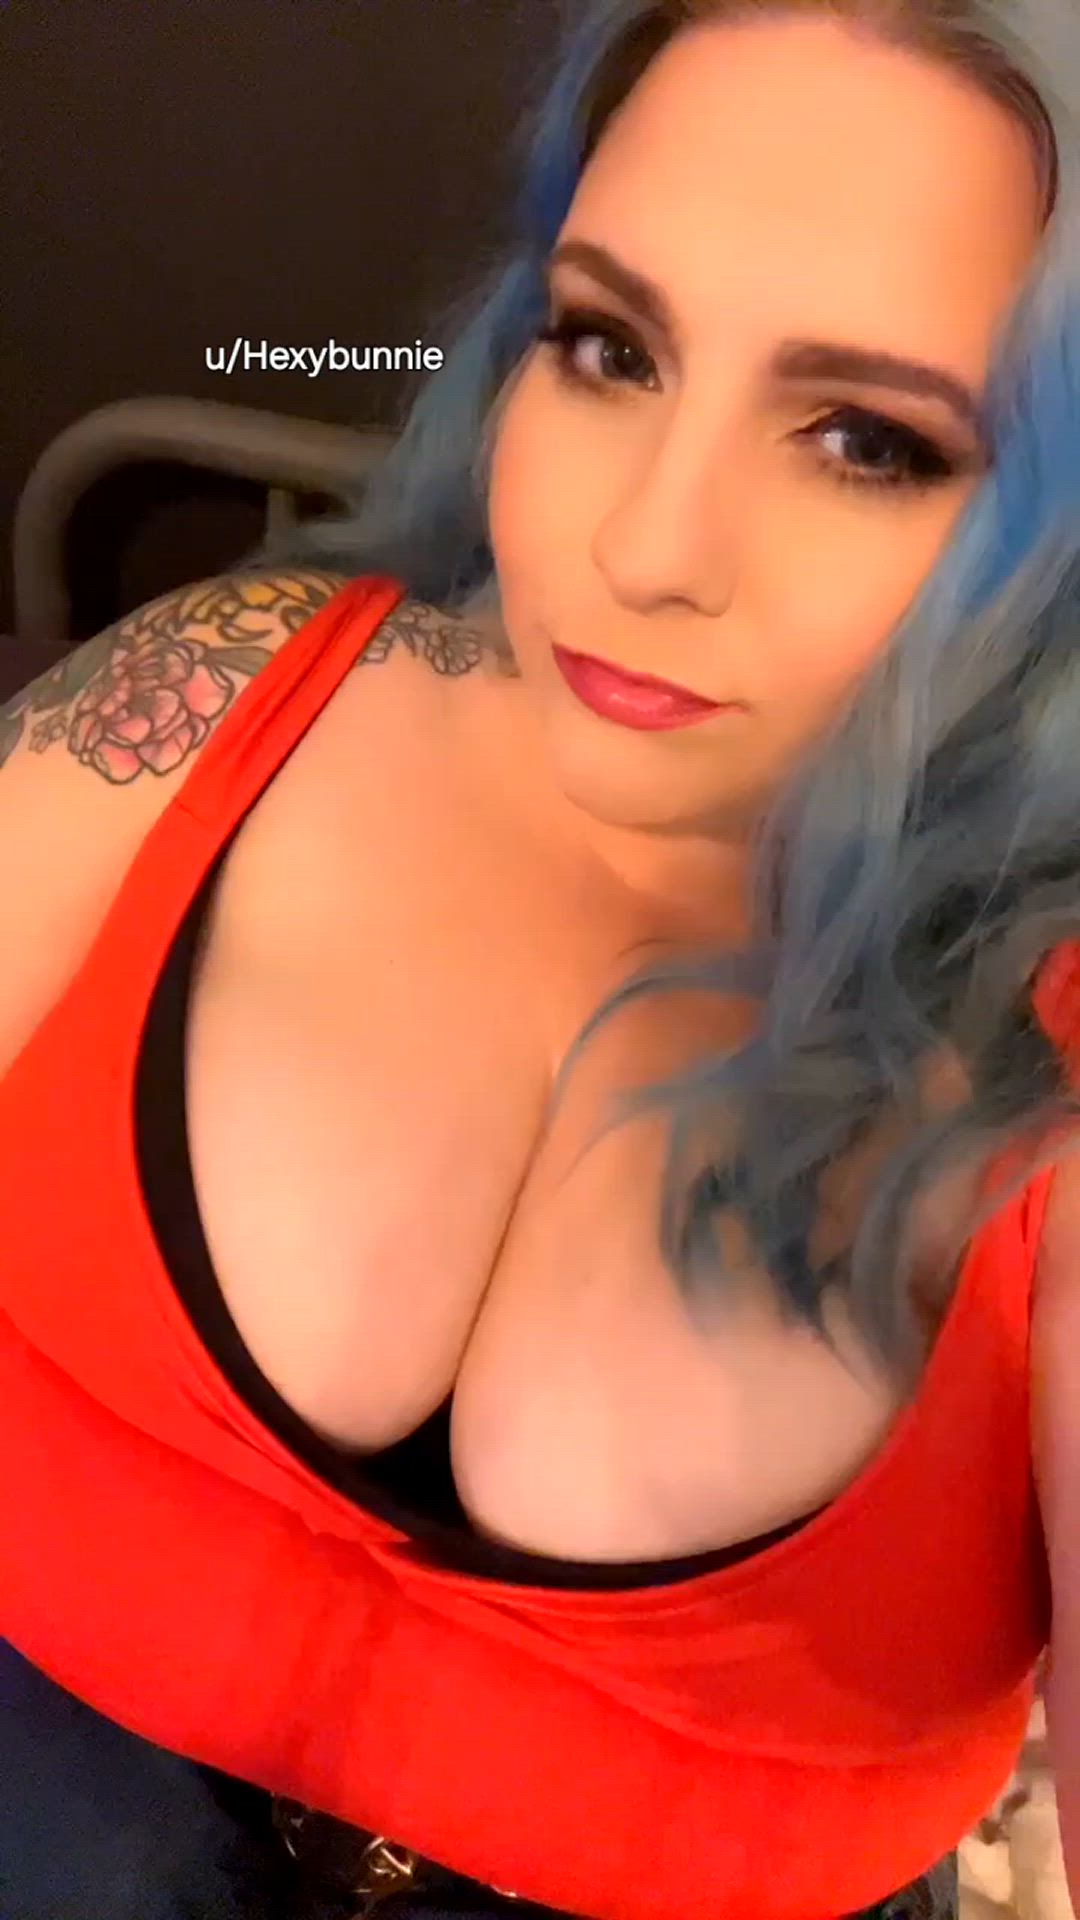 Big Tits porn video with onlyfans model hexybunnie <strong>@hexybunnie</strong>